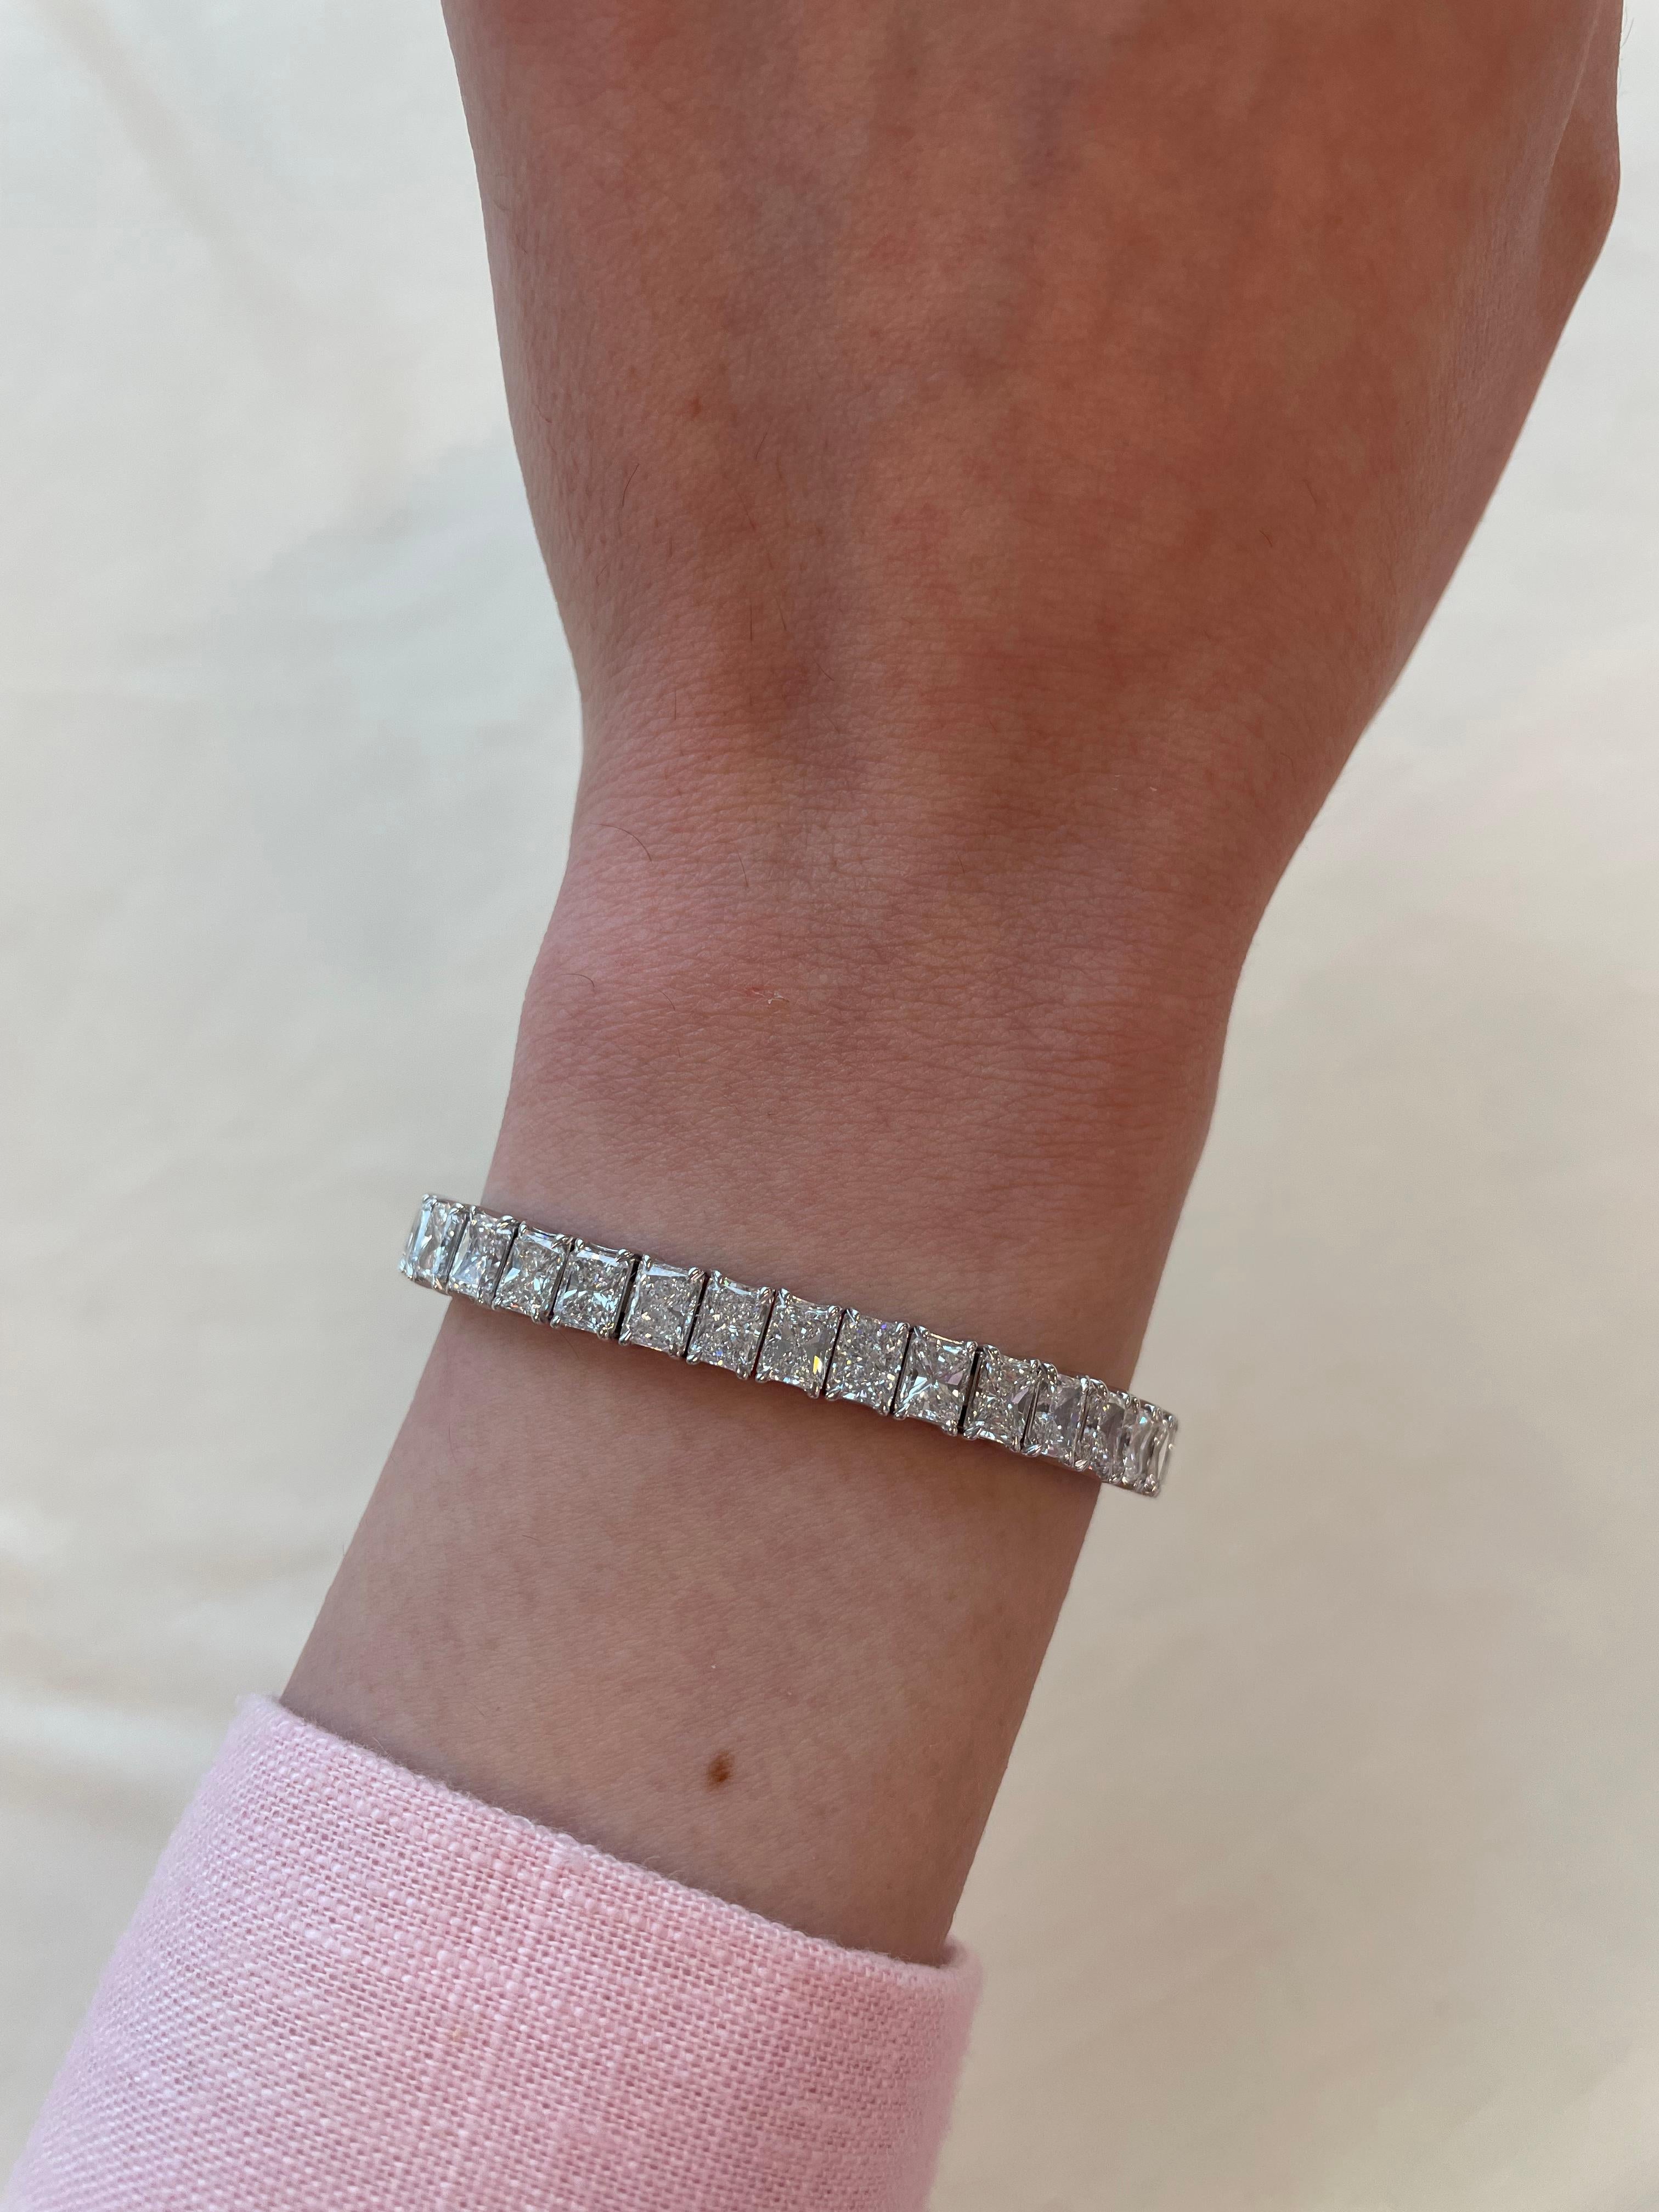 Stunning modern straight radiant cut diamond tennis bracelet. High jewelry by Alexander Beverly Hills.
43 radiant cut diamonds, 21.80 carats. Approximately E/F color and VS clarity. 18k white gold, 26.40 grams, 7 inches.
Accommodated with an up to